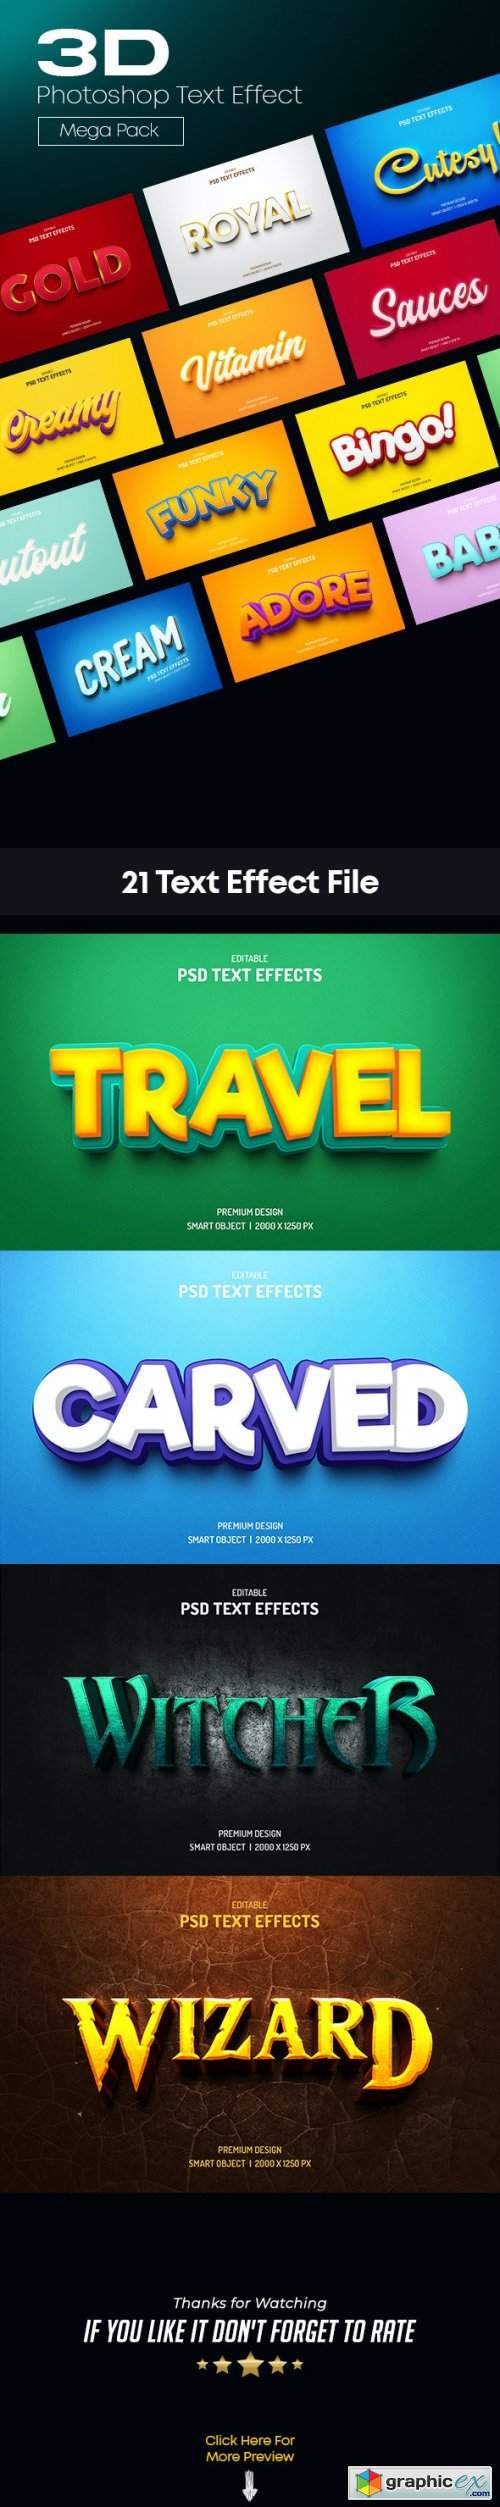 3D Photoshop Text Effects Pack 37458750